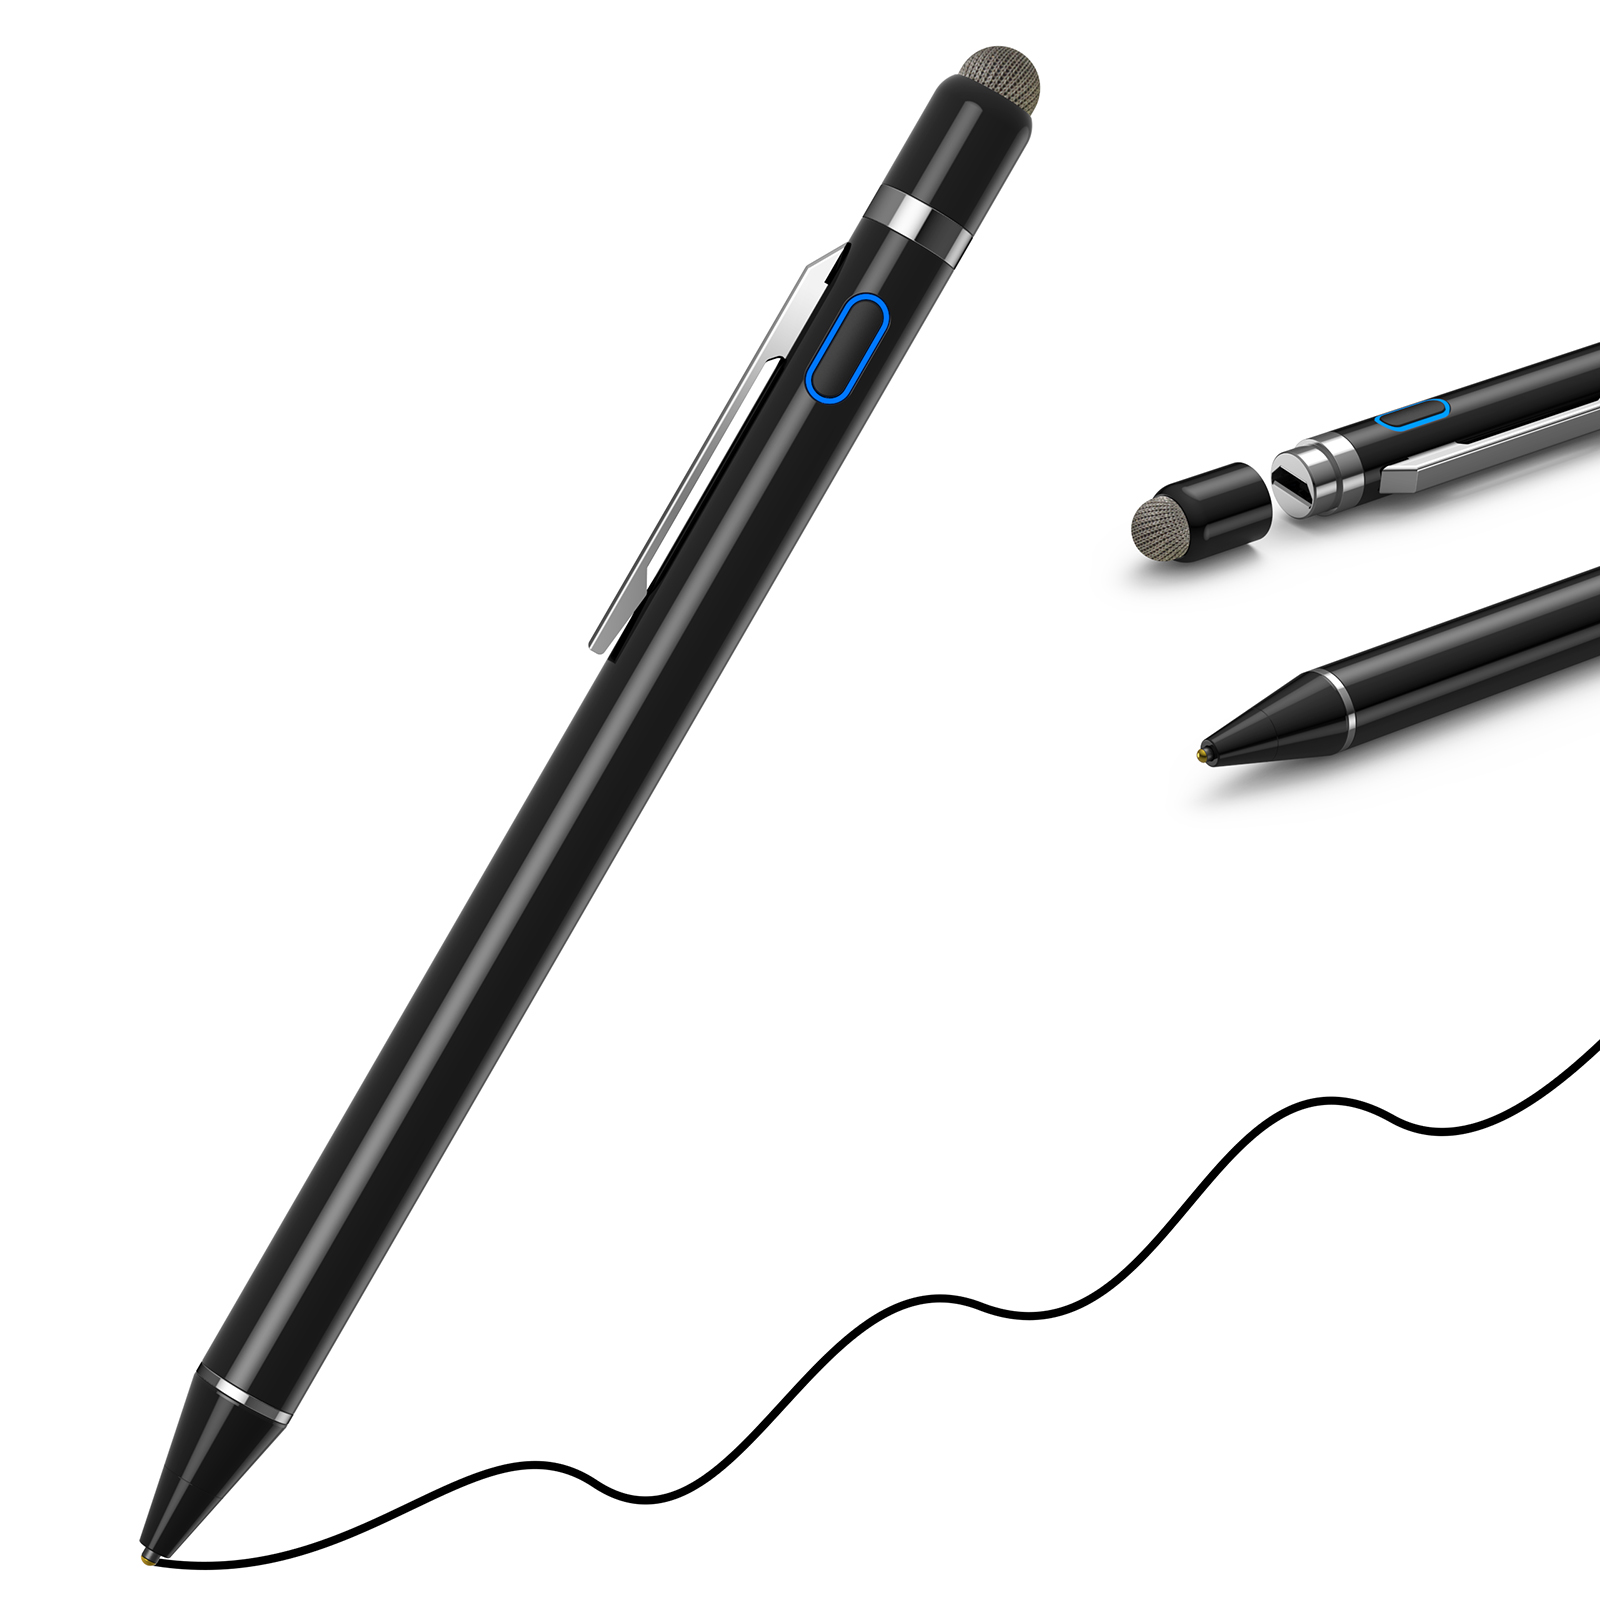 High Performance Stylus Pen For Ipad Air - K825 2in1 Stylus Pen, can be used without charging – Centyoo